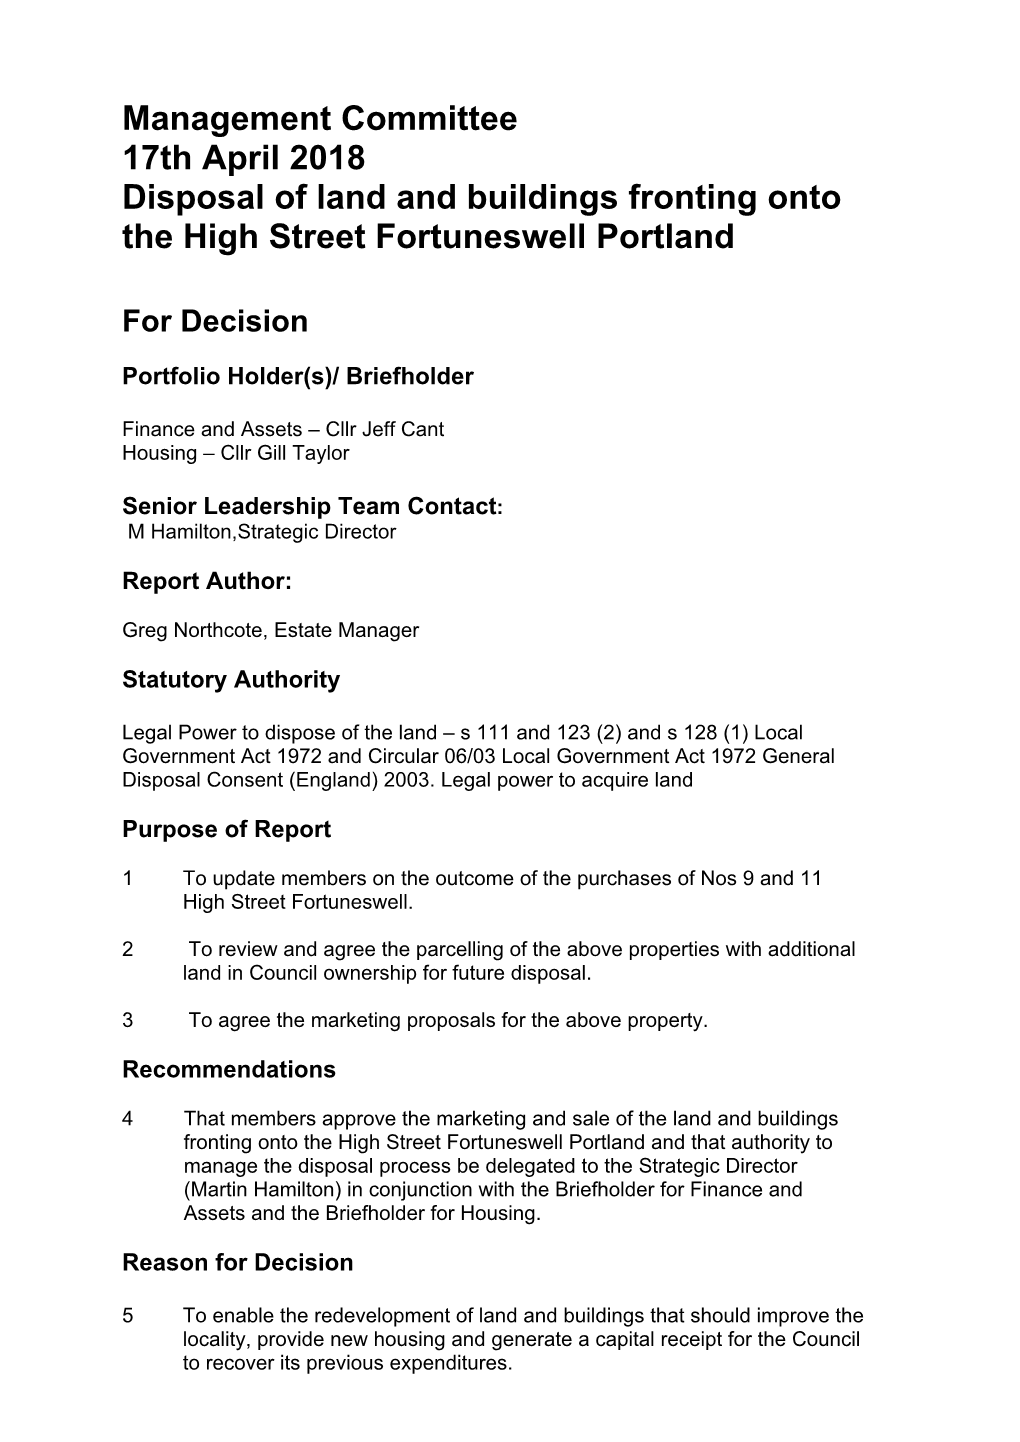 Disposal of Land and Buildings Fronting Onto the High Street Fortuneswell Portland PDF 62 KB